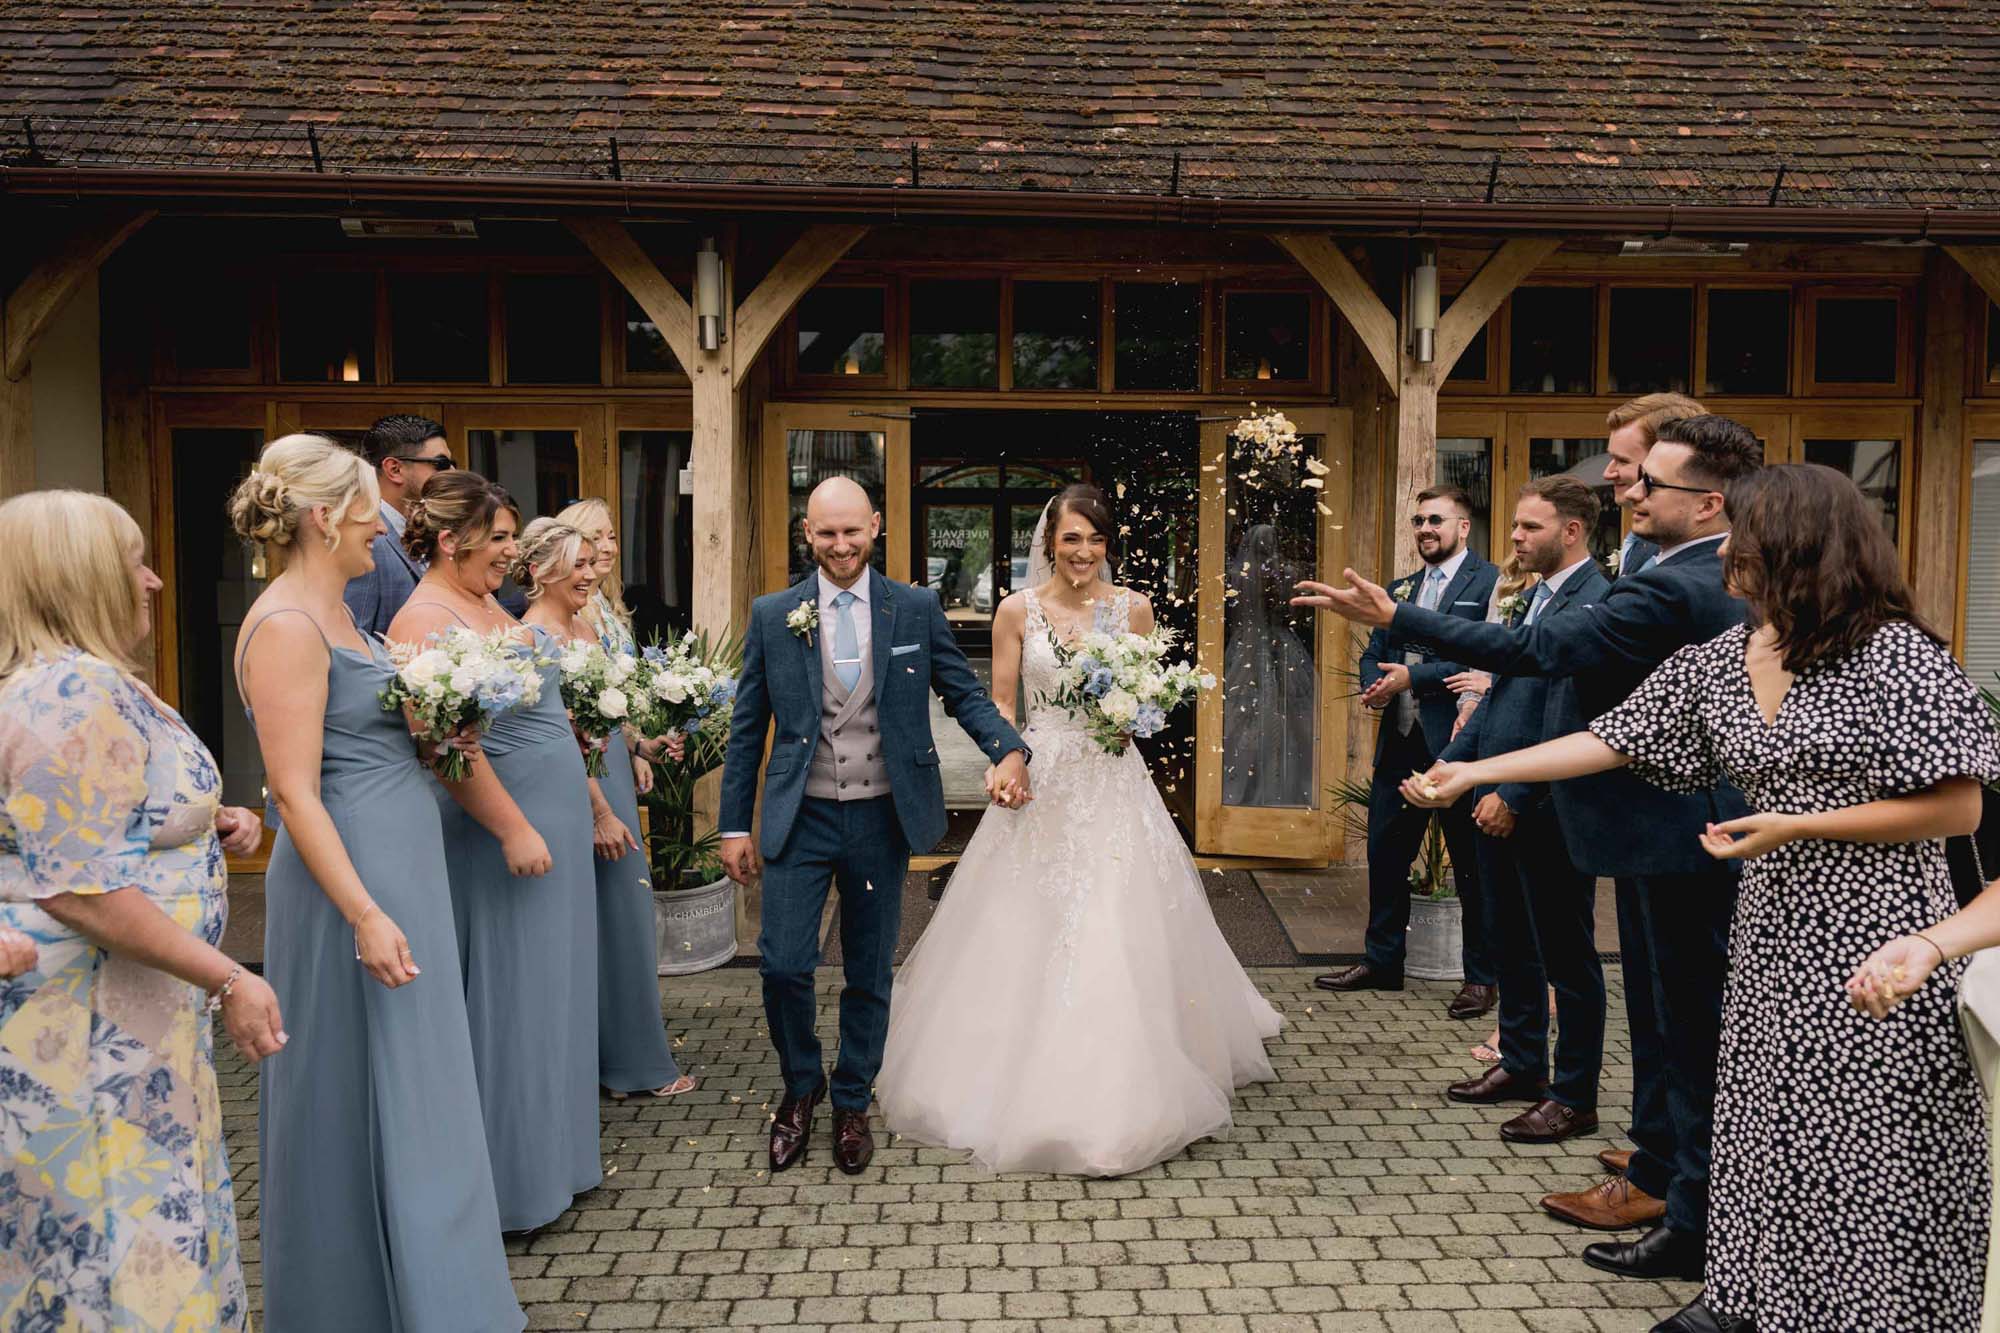 Wedding guests throw confetti at the bride and groom on their wedding day at Rivervale Barn in Hampshire.